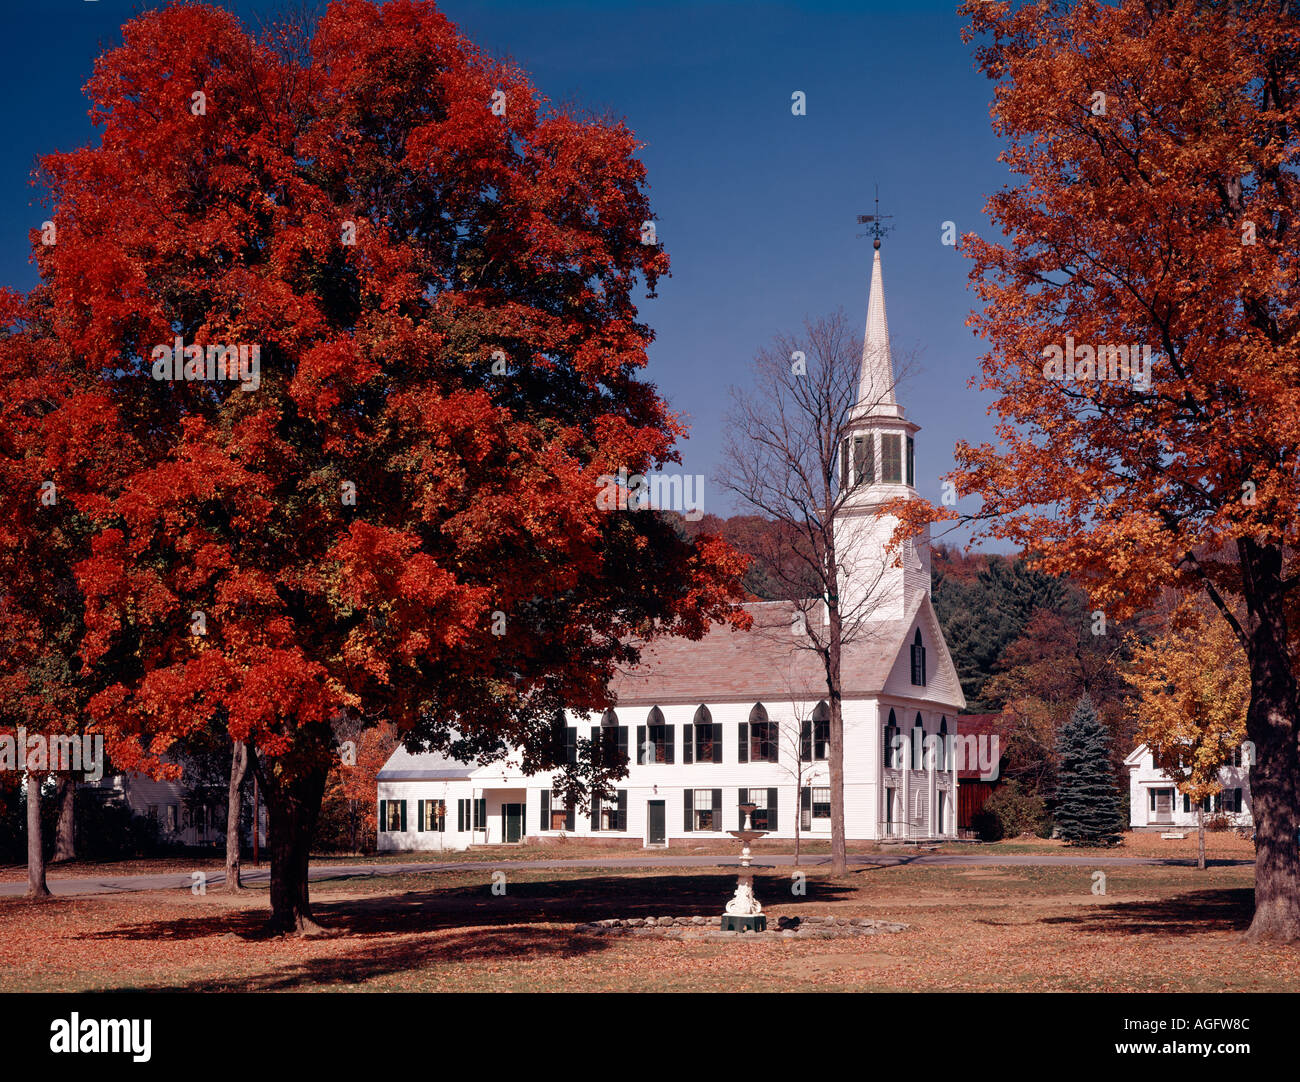 Townshend in Vermont autumnal scene with brilliant red maple leaves and the village church Stock Photo